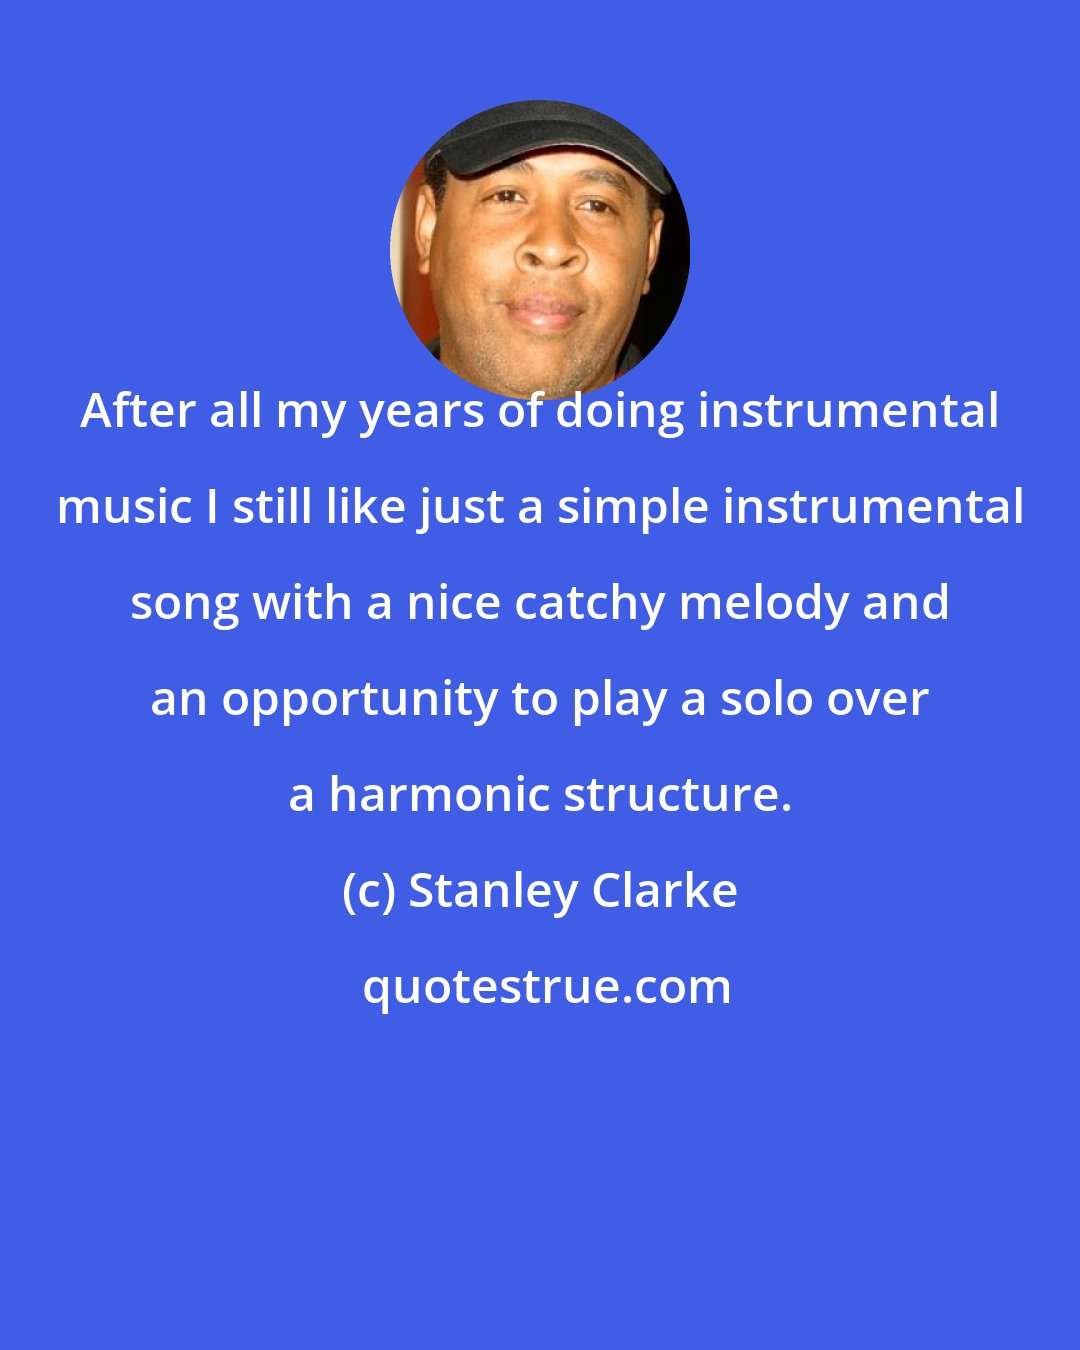 Stanley Clarke: After all my years of doing instrumental music I still like just a simple instrumental song with a nice catchy melody and an opportunity to play a solo over a harmonic structure.